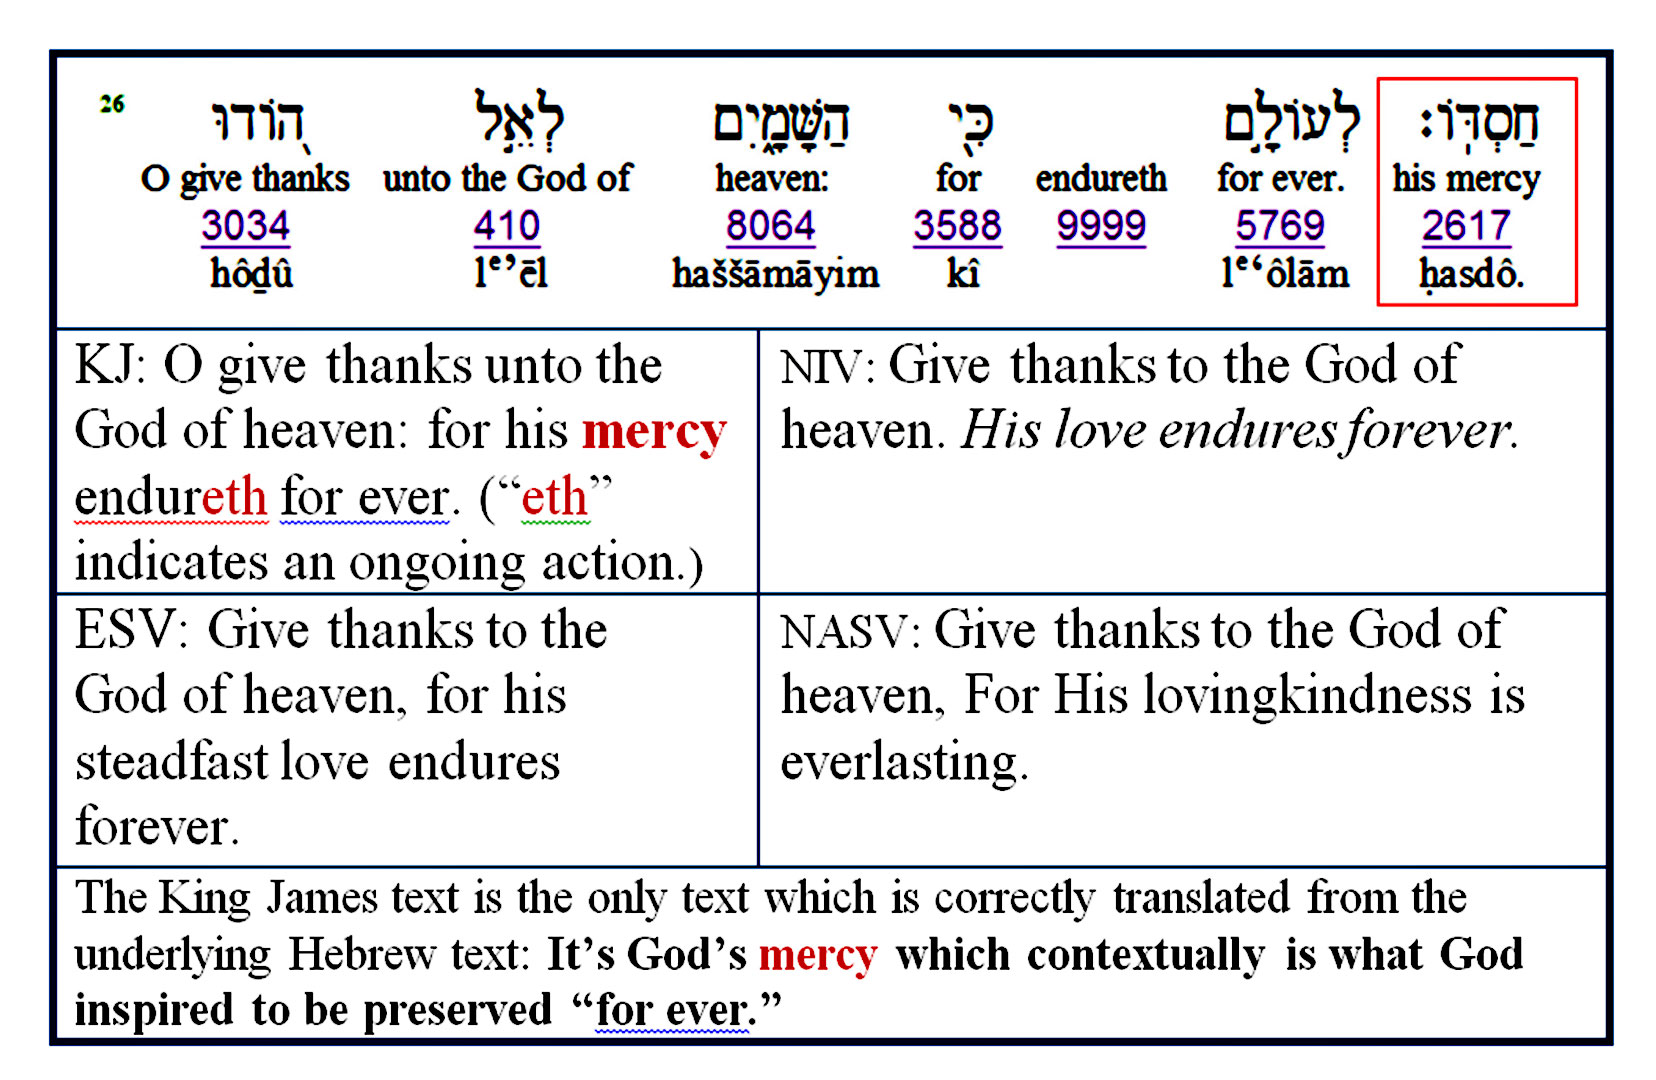 Table for Psalm 138:26 showing mistranslation of this Scripture by NIV, ESV, and NASV. They remove the word mercy.